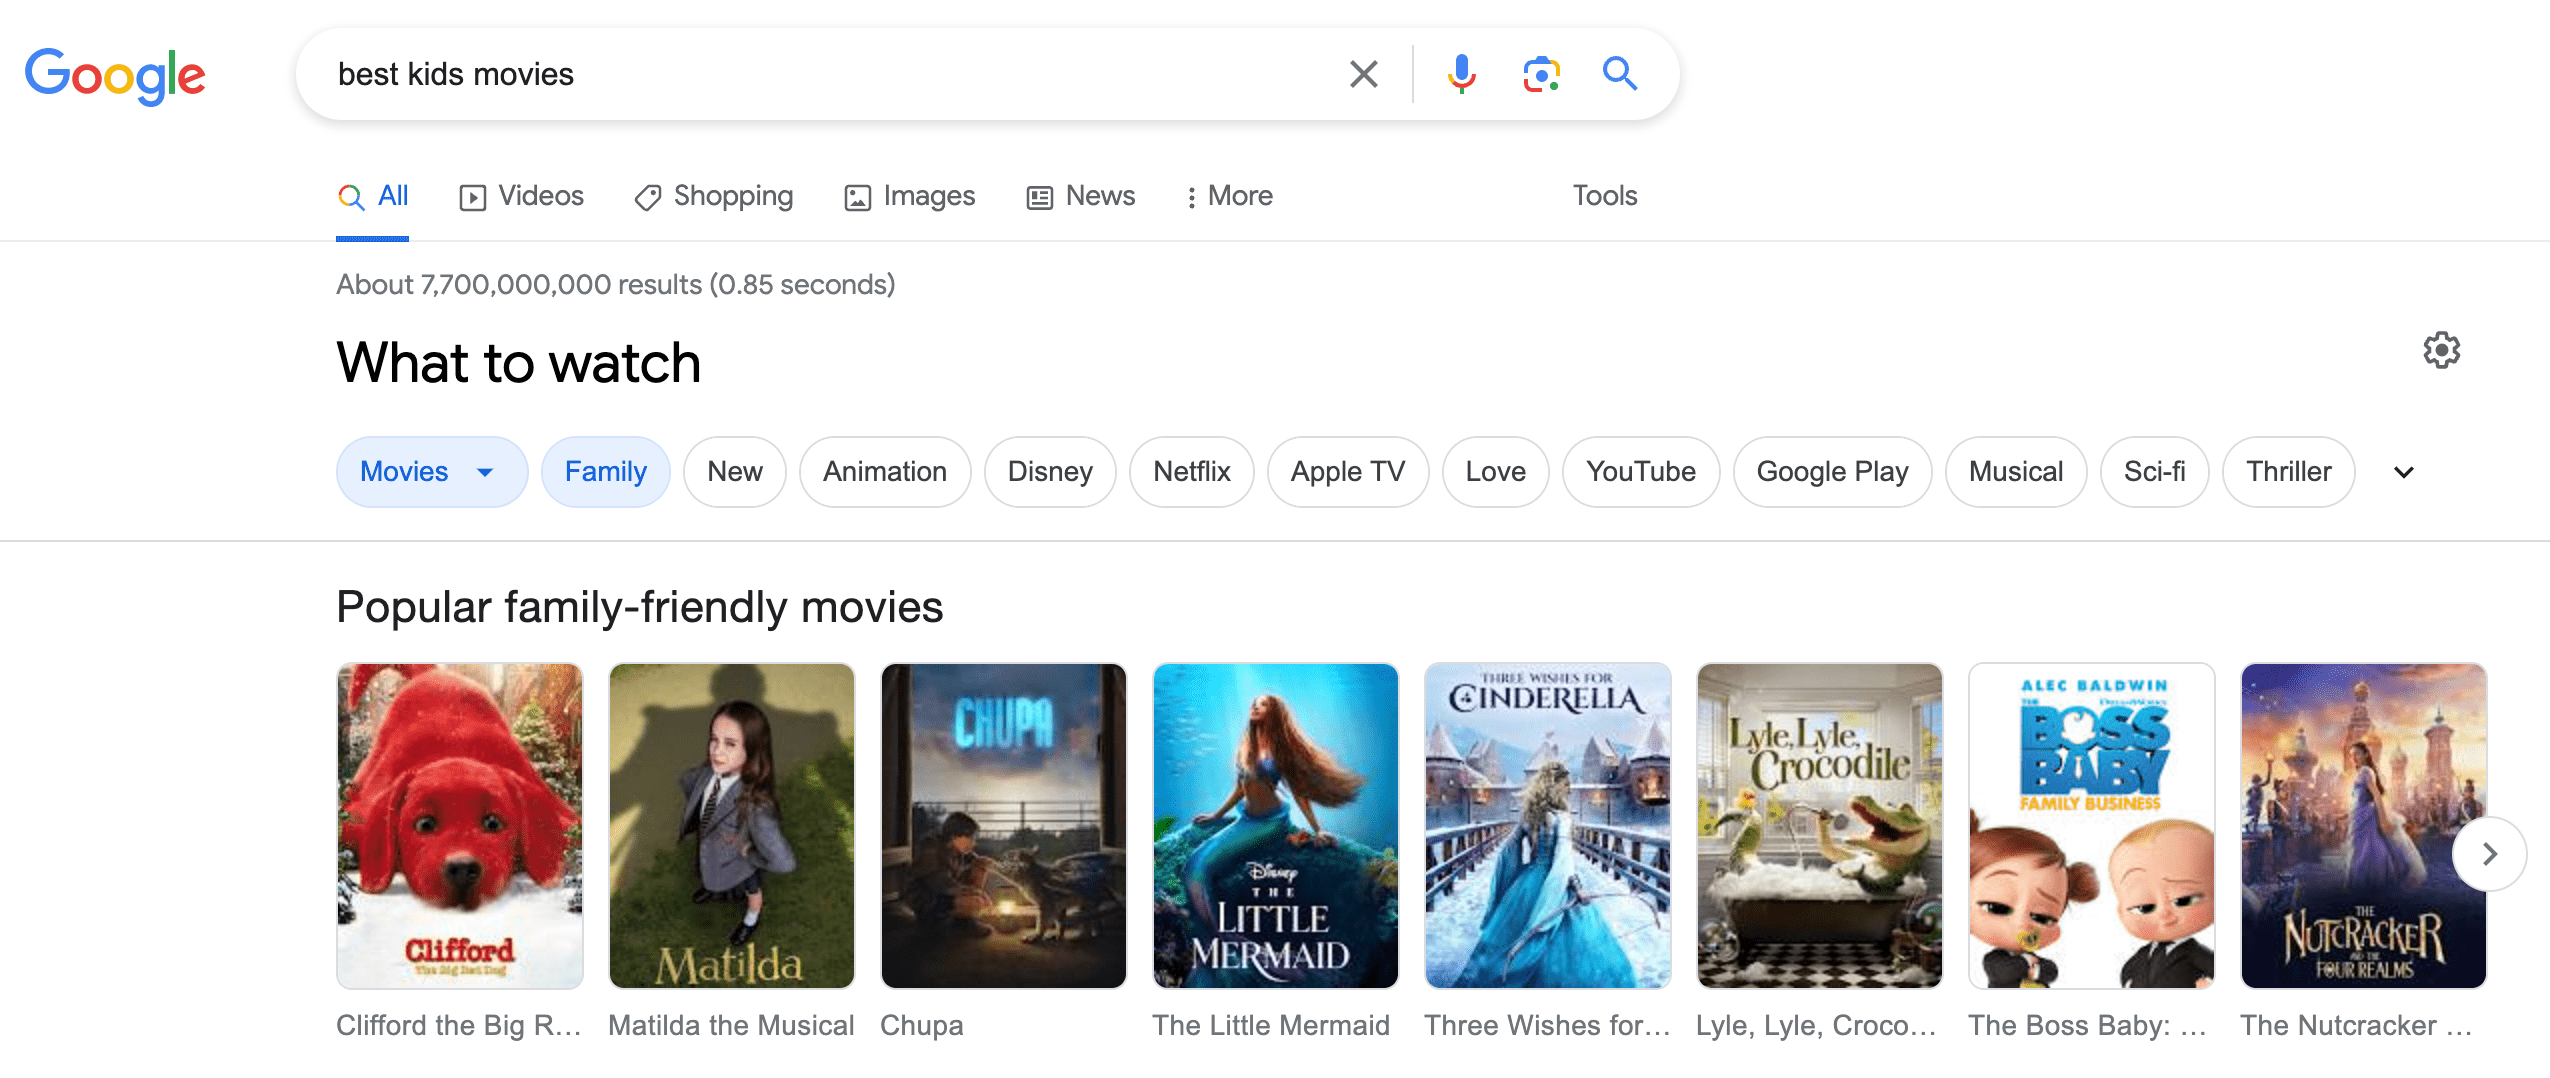 Carousel results in Google